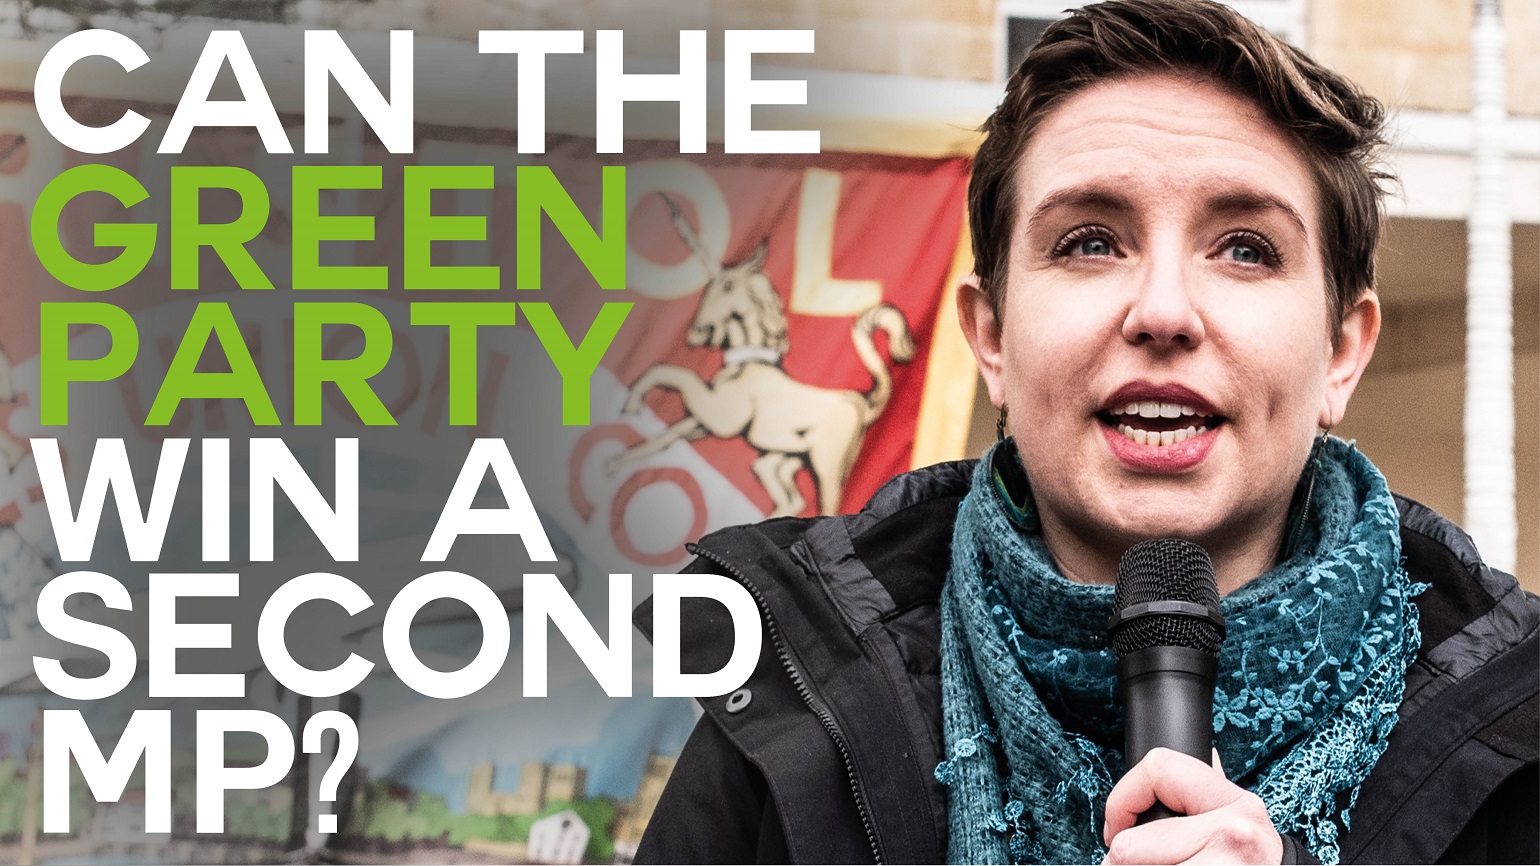 A photo of Green Party co-leader Carla Denyer with text overlaid reading "Can the Green Party win a second MP?